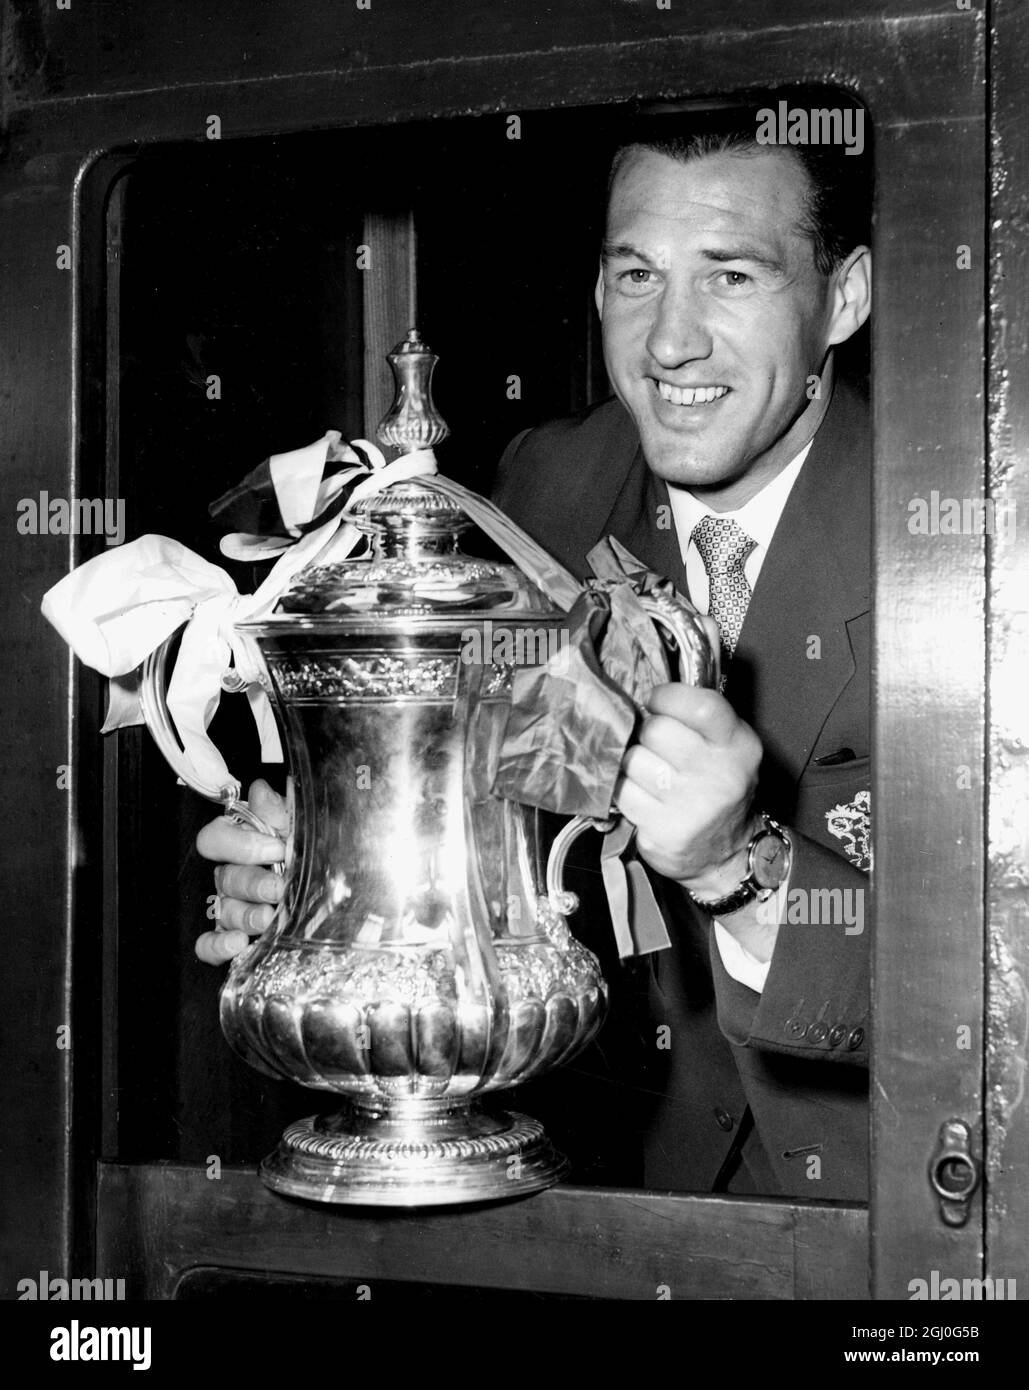 Nat Lofthouse, captain of Bolton Wanderers seen at Euston Station with the F.A Cup which his team won at Wembley. 5th May 1958 Stock Photo